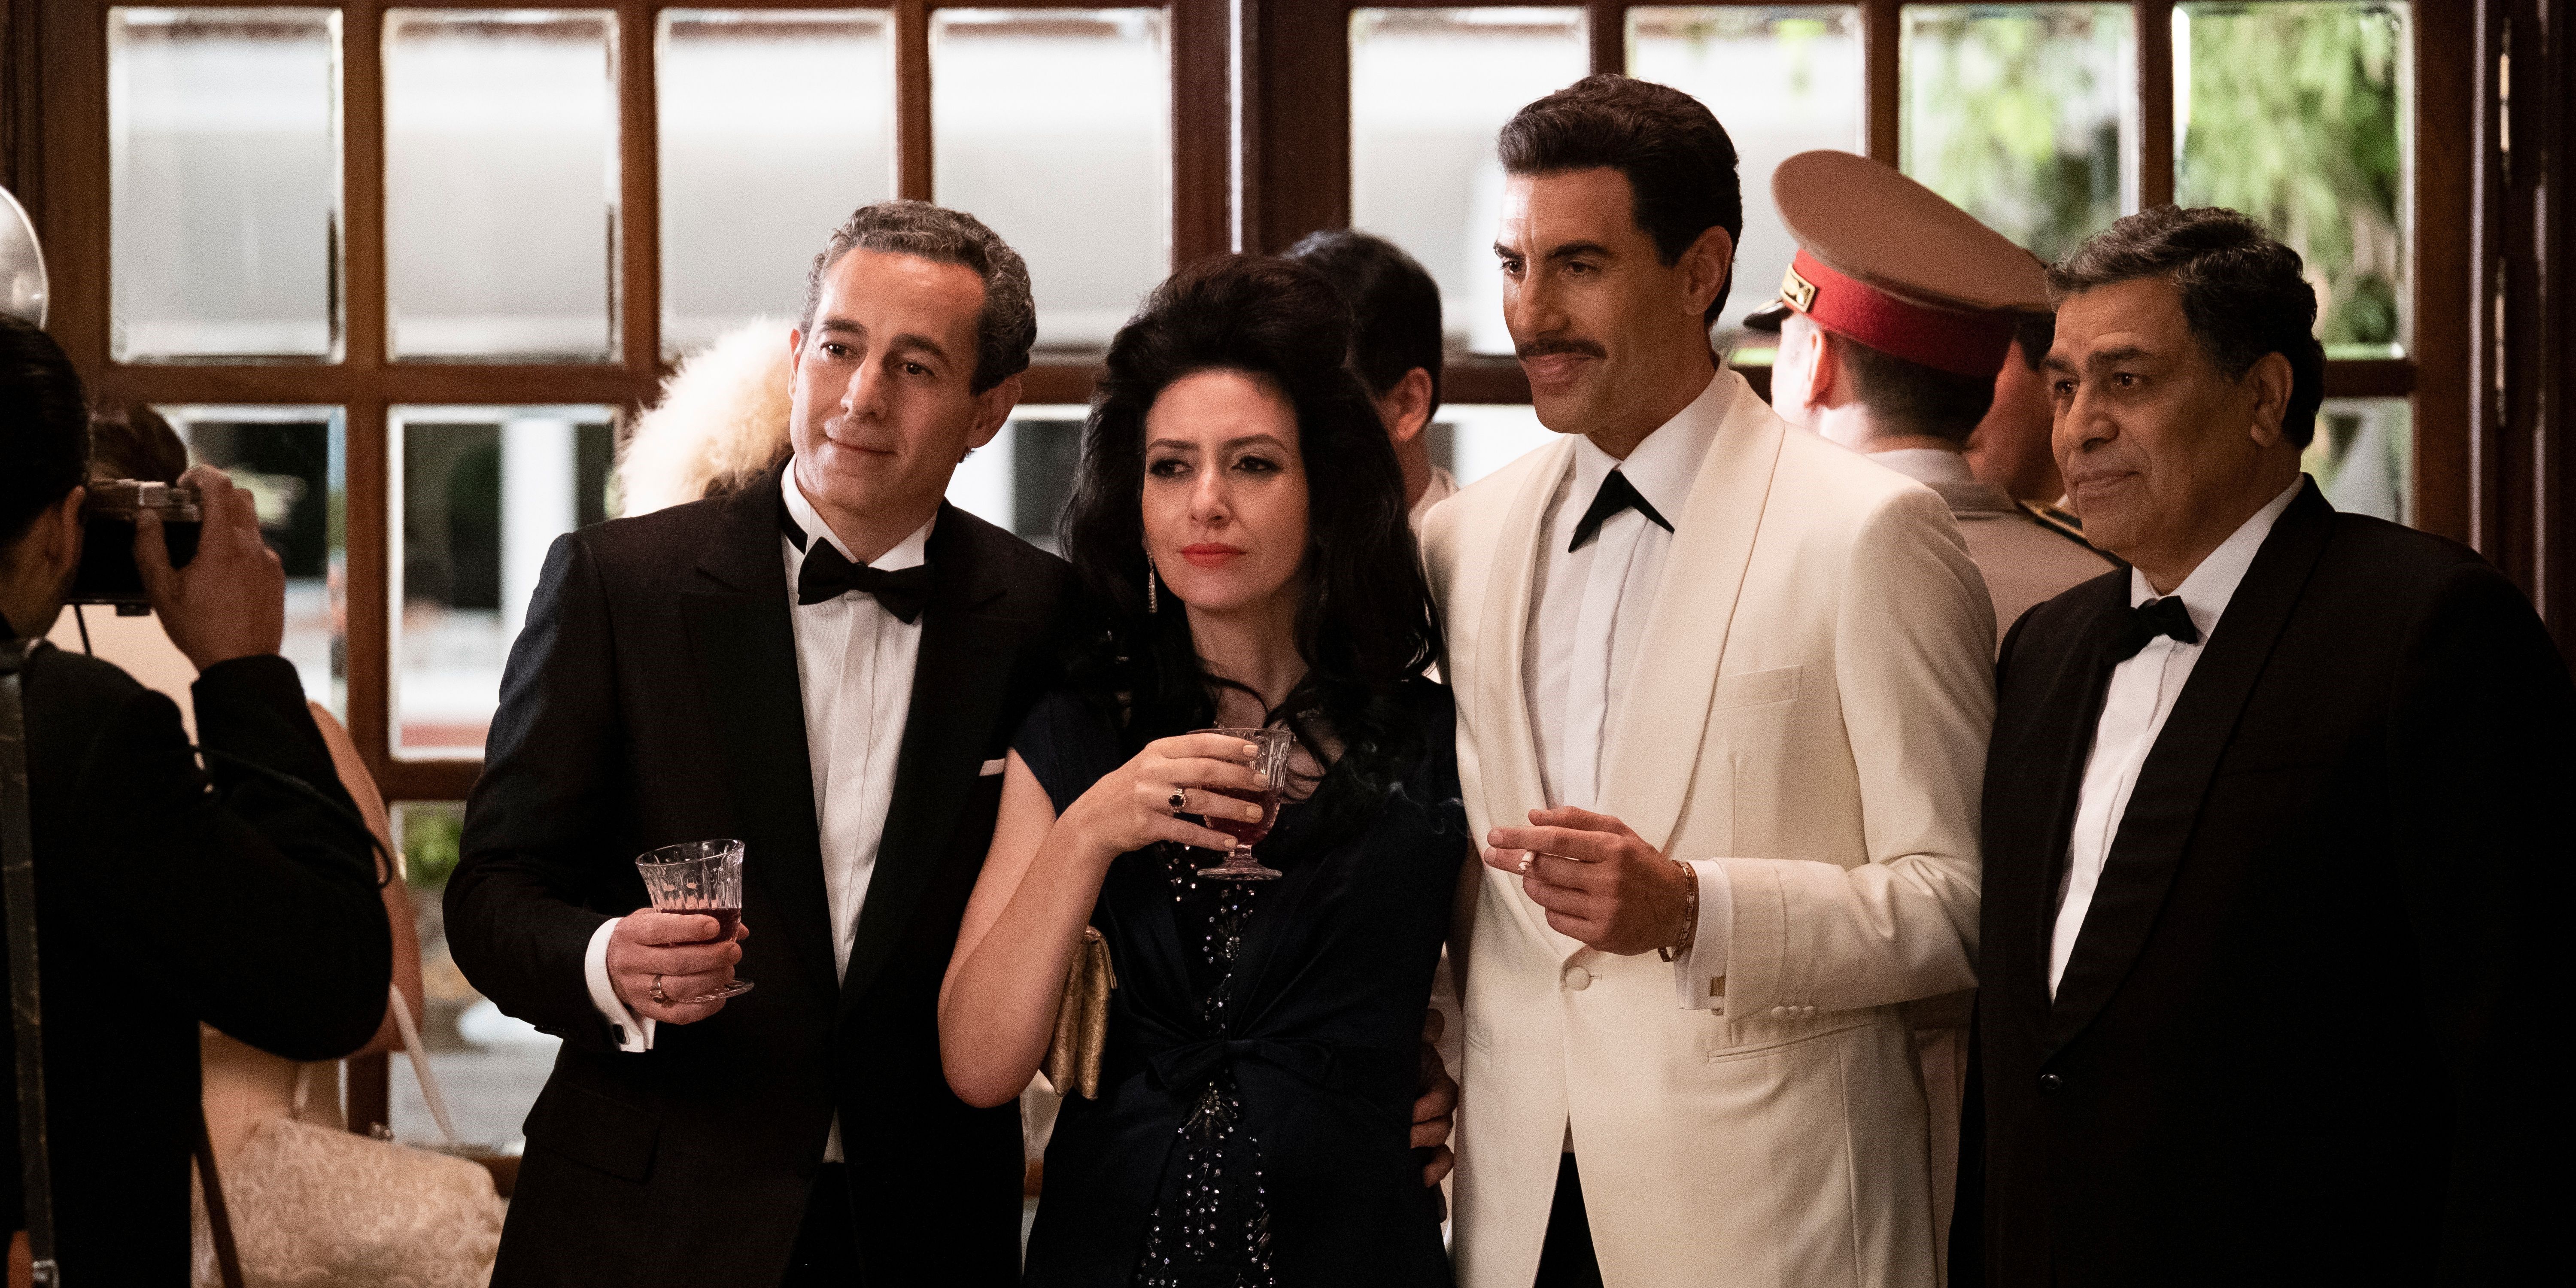 Sasha Baron Cohen takes a picture with a group of people in The Spy